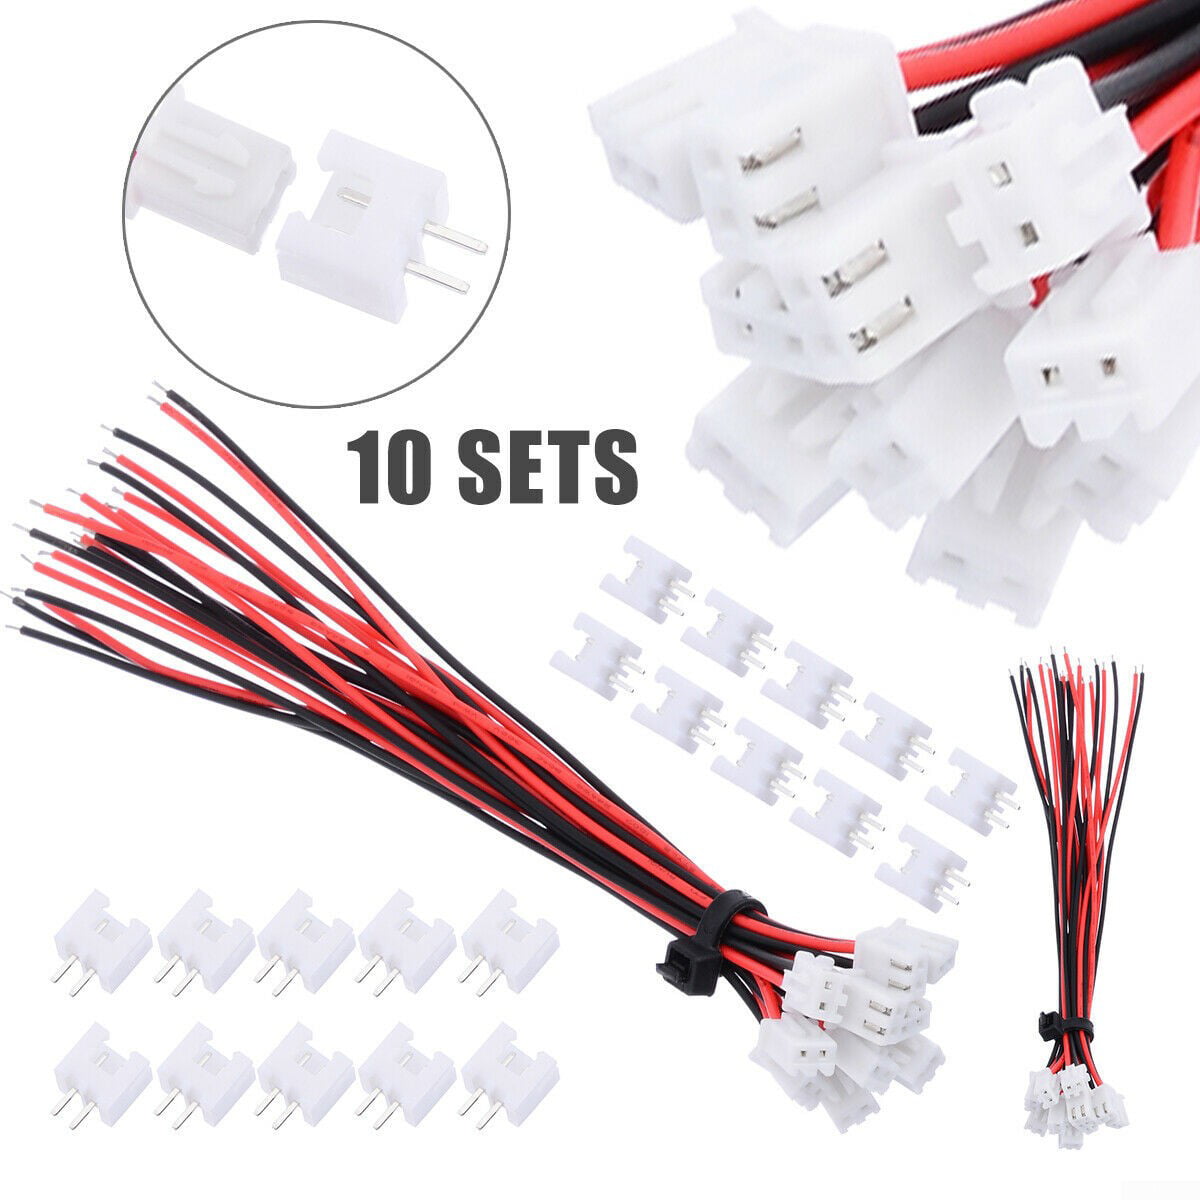 10 Set 4 Pin Mini Micro JST XH 2.54mm 24AWG Connector Plug With Wires 150mm BE 